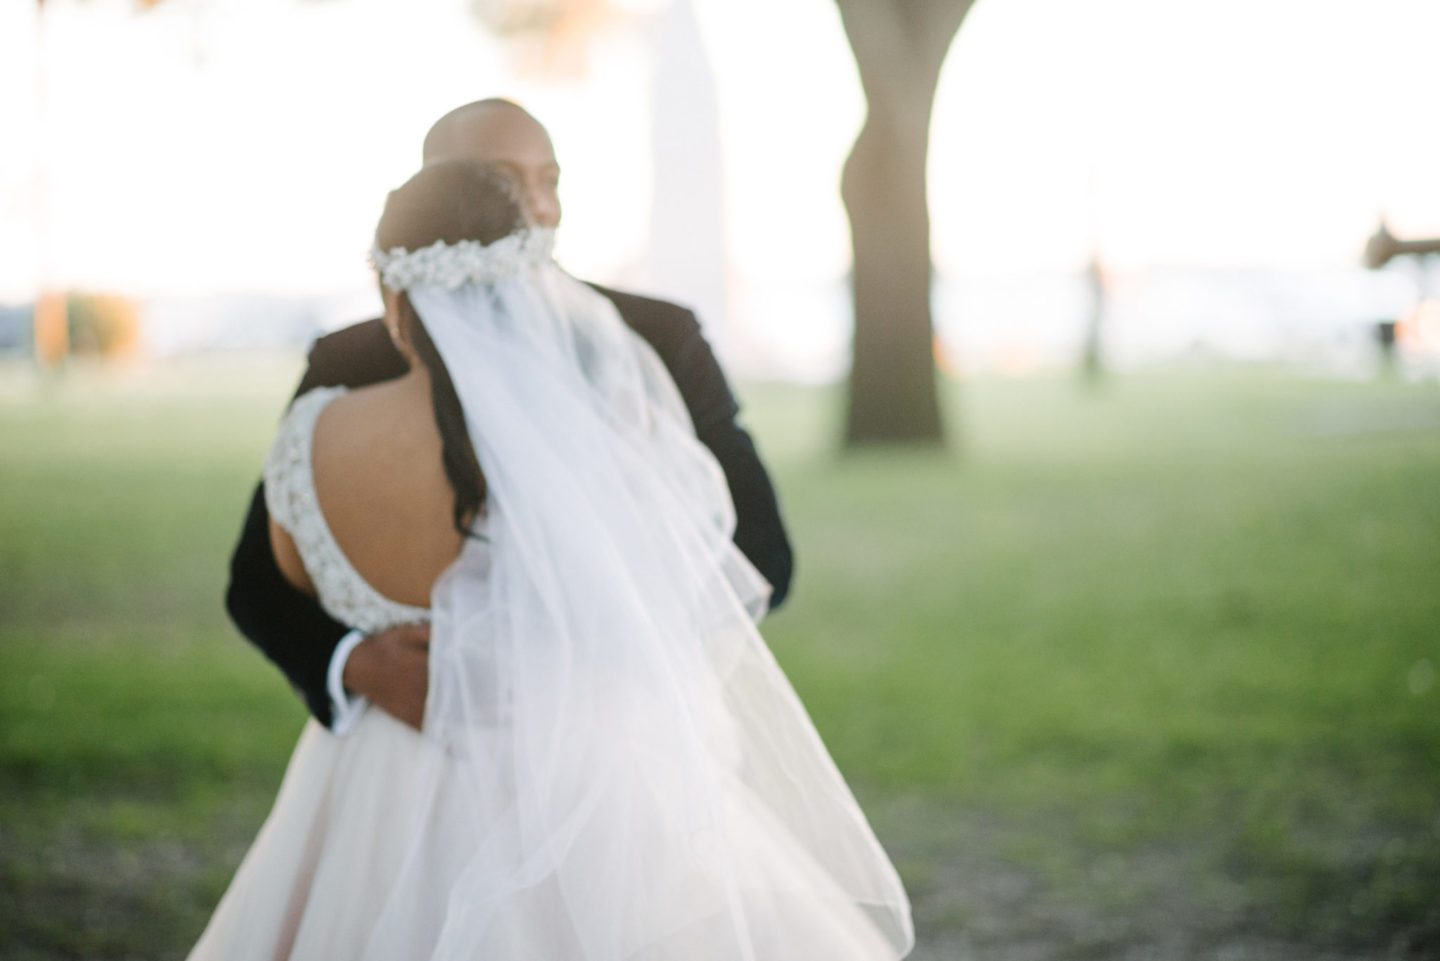 WhenLoveWorks Founder Offers 4 Tips for Newlyweds to Thrive 3